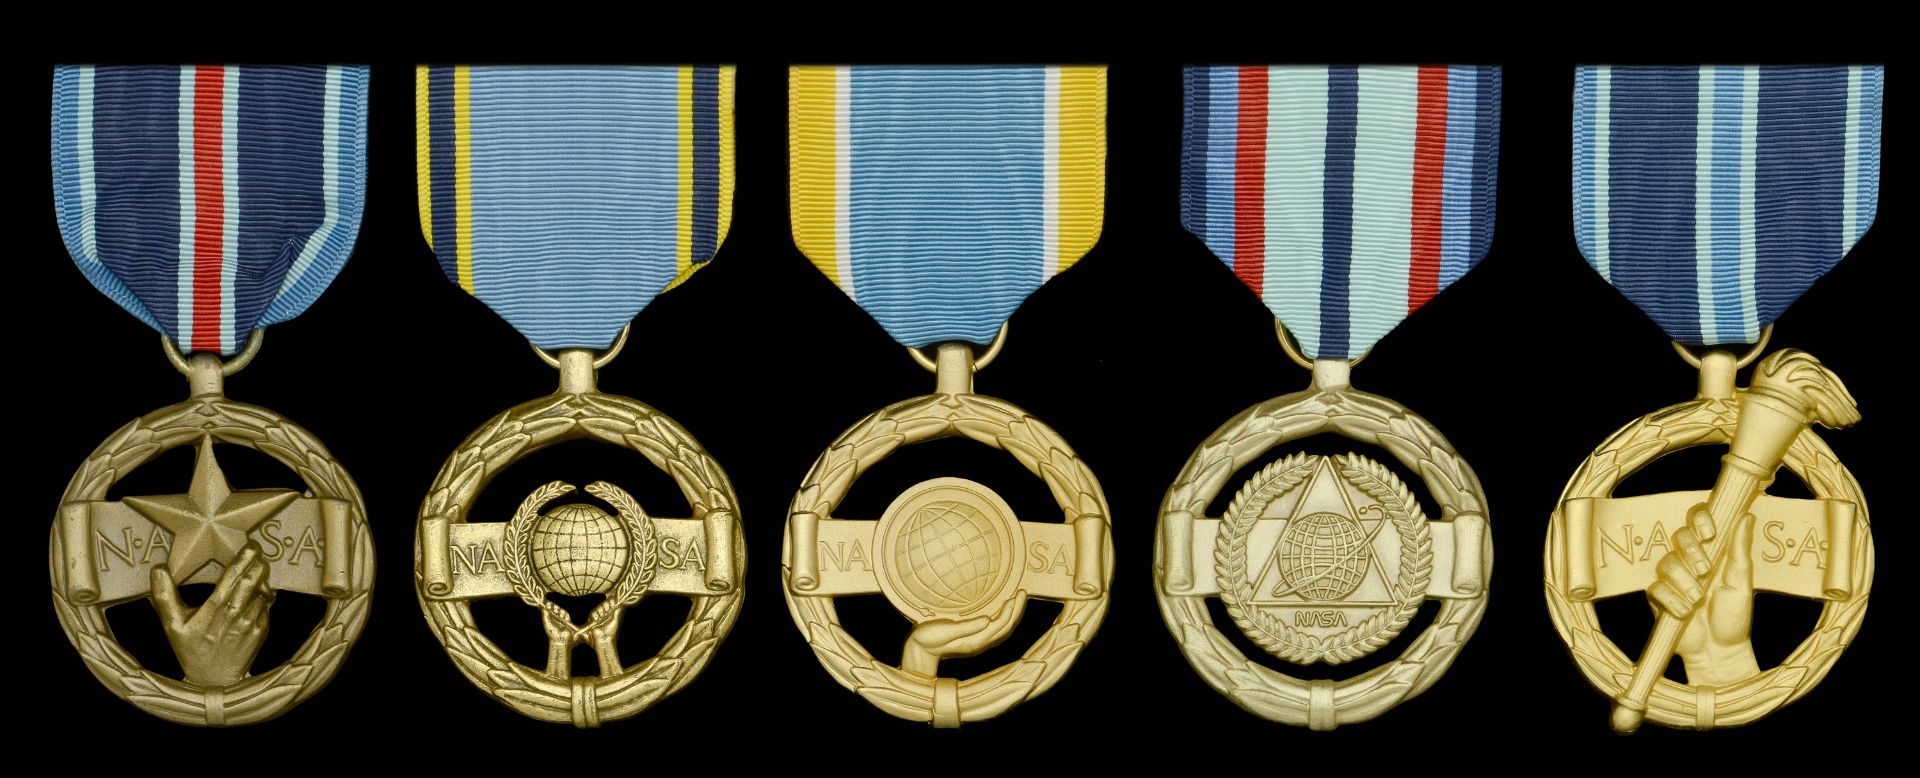 A Collection of National Aeronautics and Space Administration Medals United States of Ame...